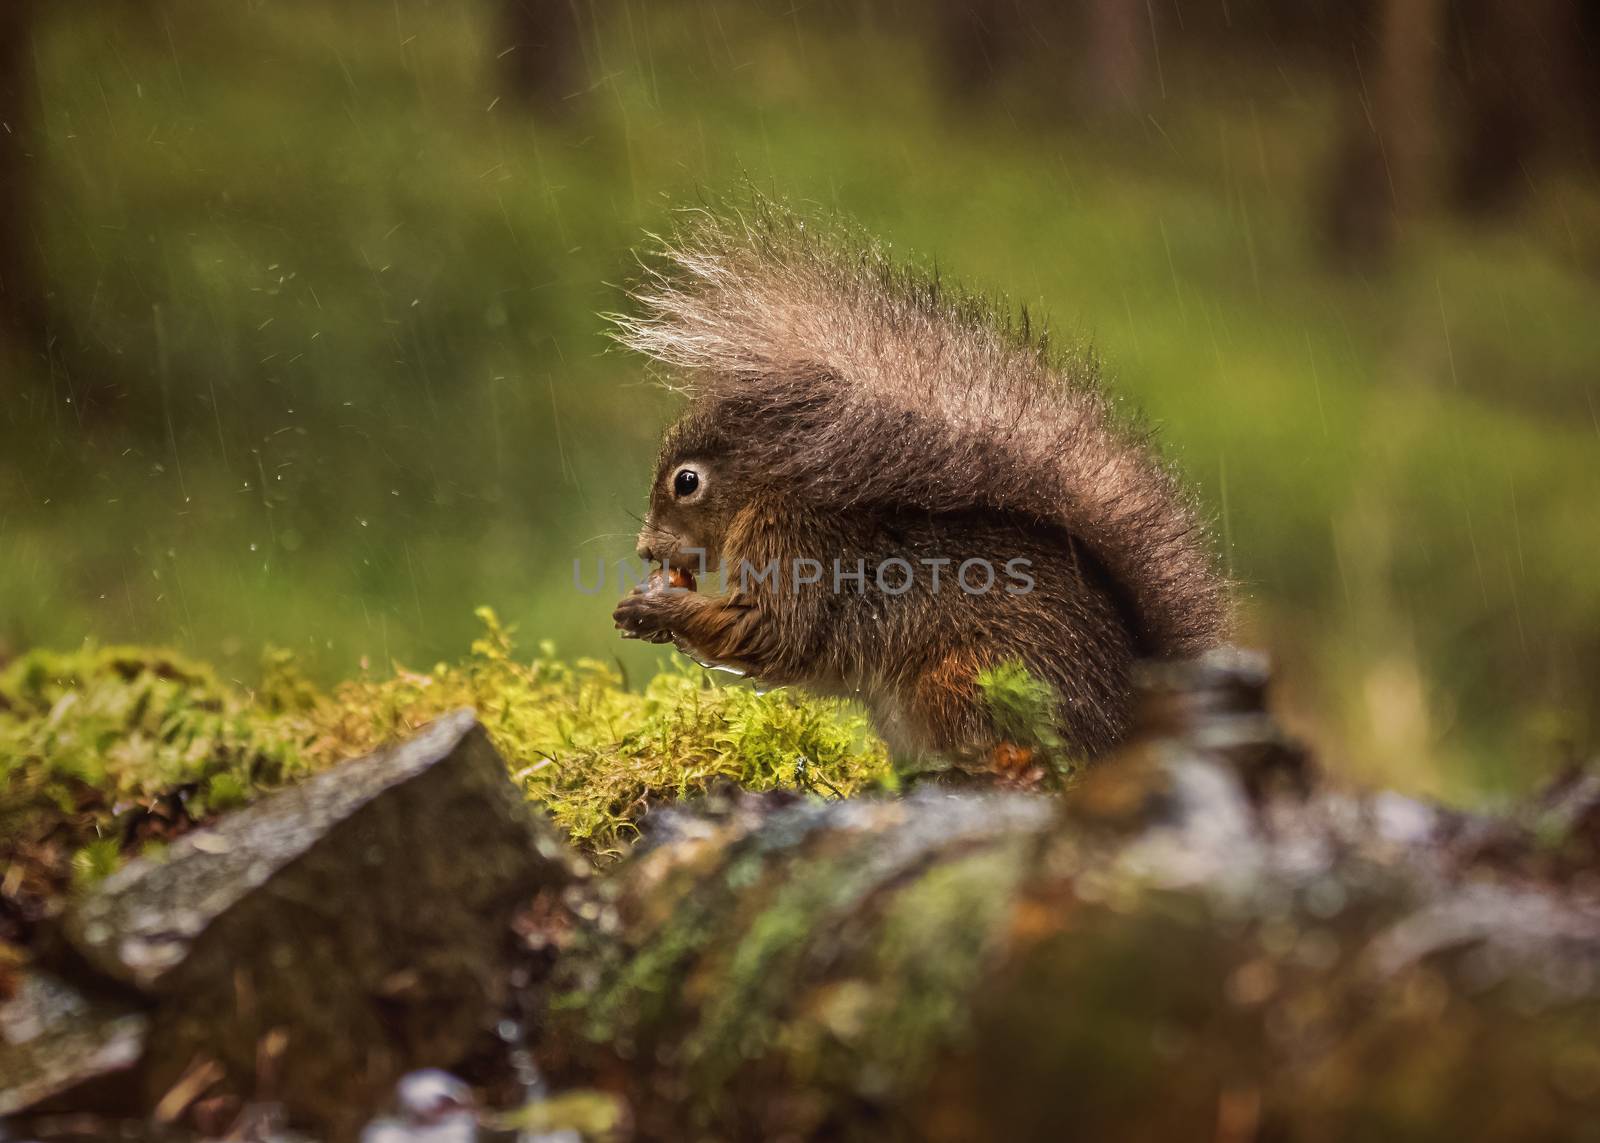 Red Squirrel sheltering under his own tail as the rain falls by mrs_vision